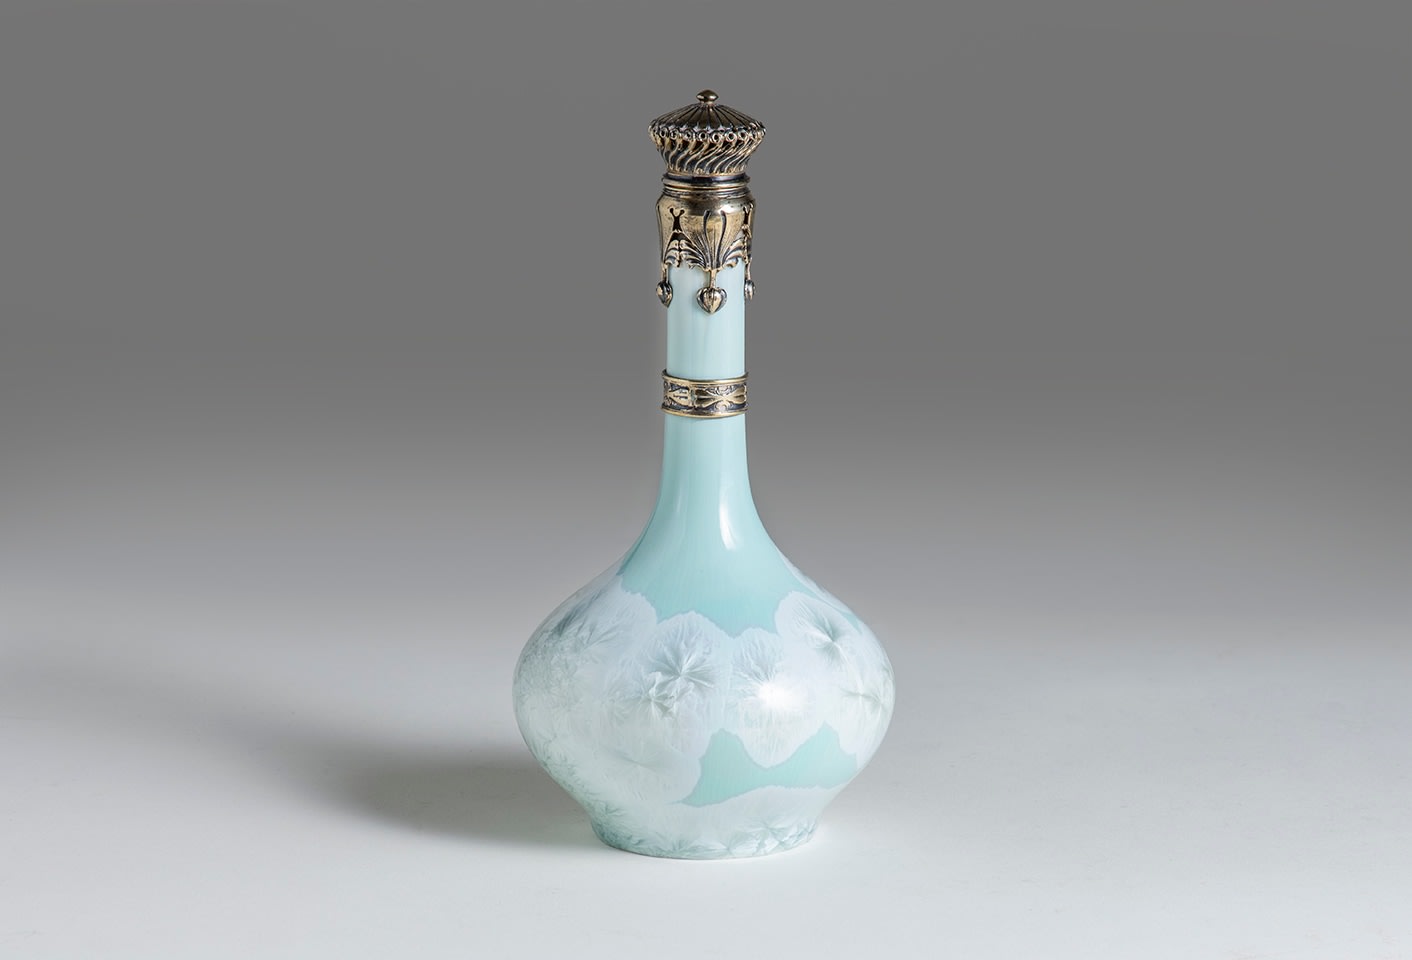 a perfume bottle, glazed in glossy aqua blue, the bottom with white crystalline glaze, with a silver gilt topper in art nouveau style with swirling decoration